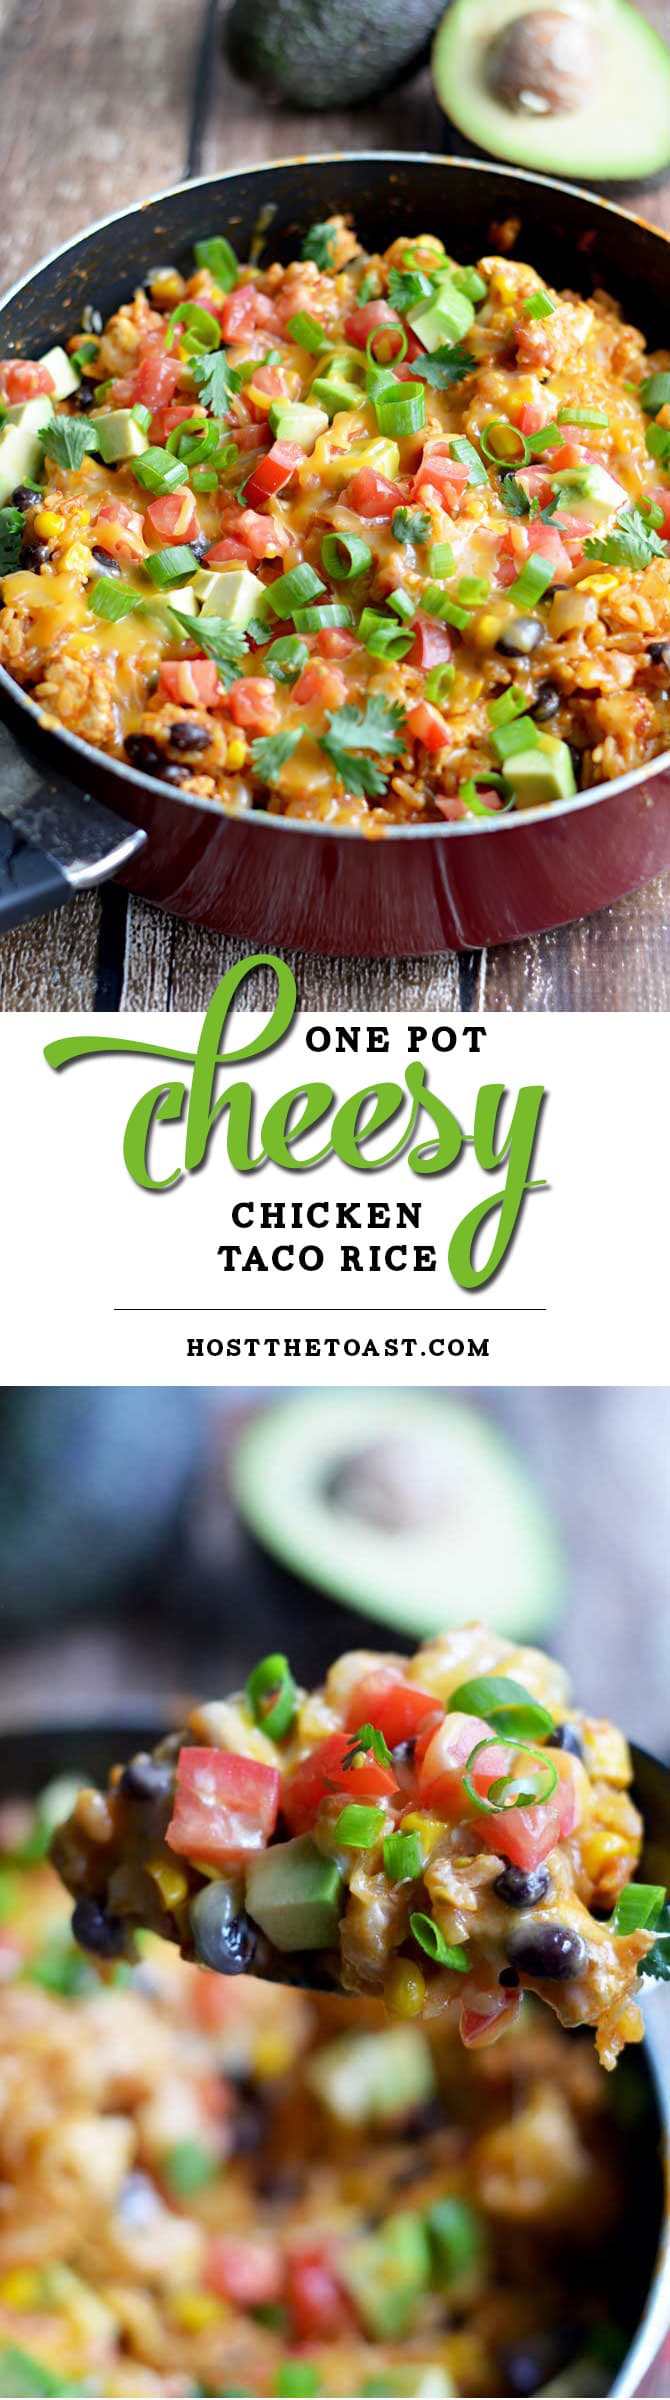 One Pot Cheesy Chicken Taco Rice. This 30 minute, one pot meal will become a quick family favorite! | hostthetoast.com